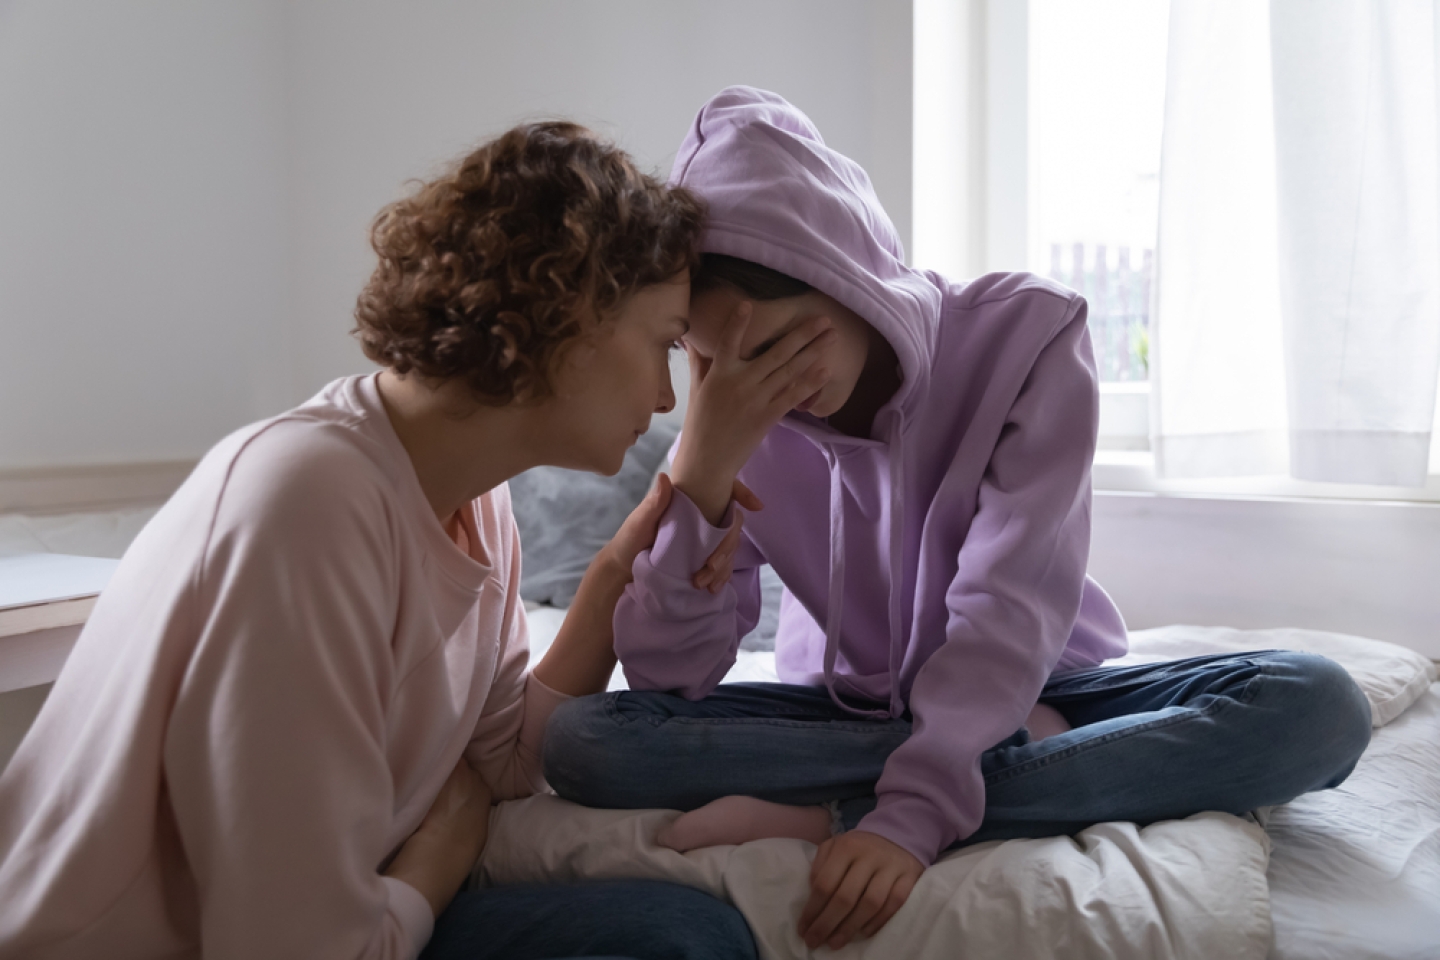 Worried parent young mom comforting depressed crying teen daughter bonding at home.